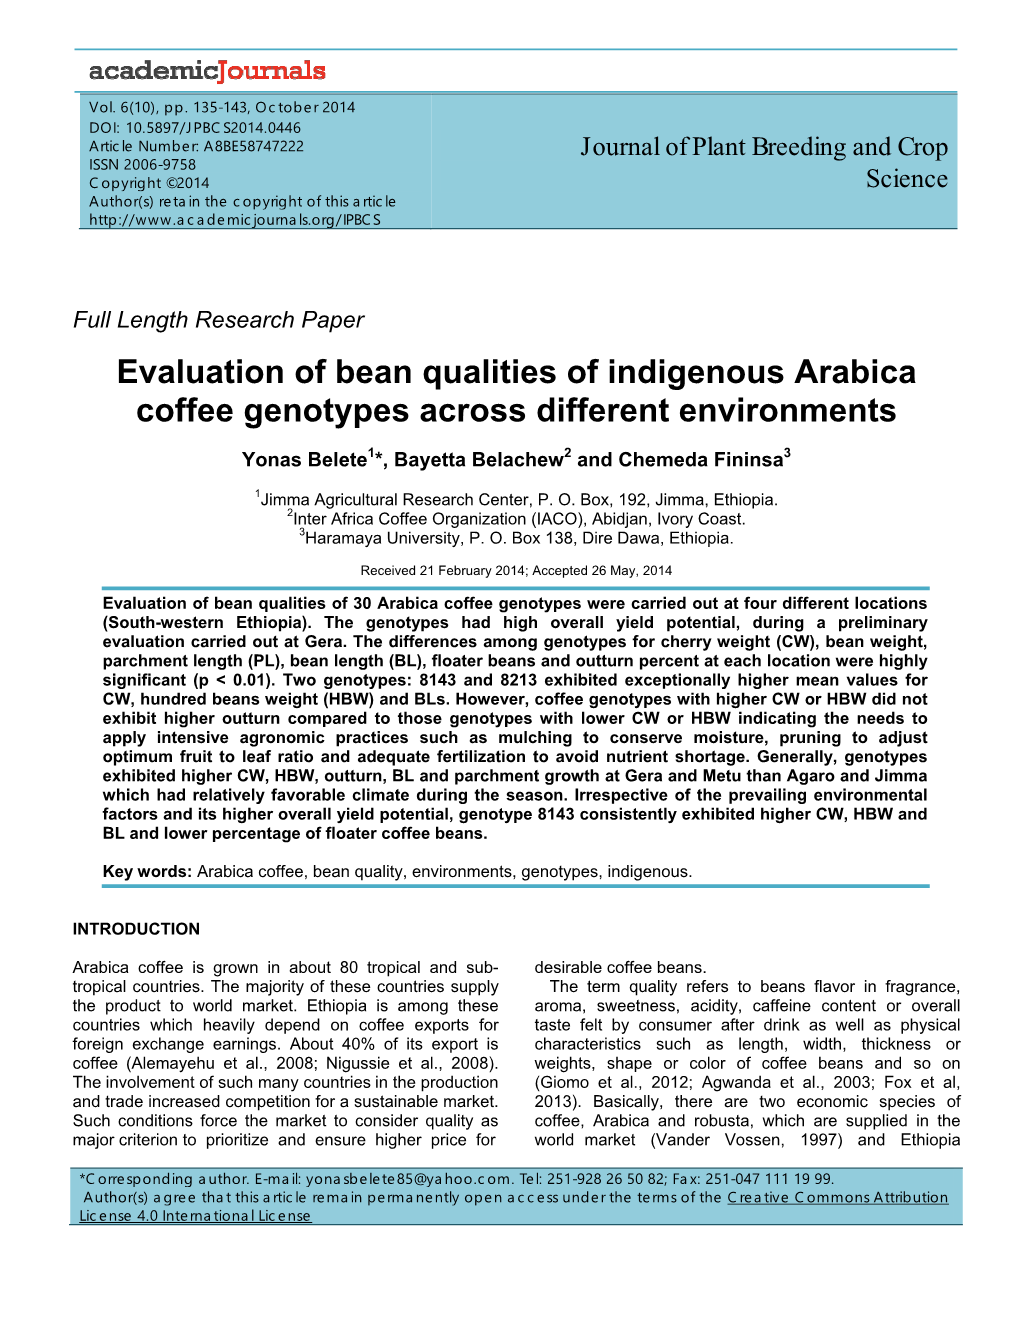 Evaluation of Bean Qualities of Indigenous Arabica Coffee Genotypes Across Different Environments